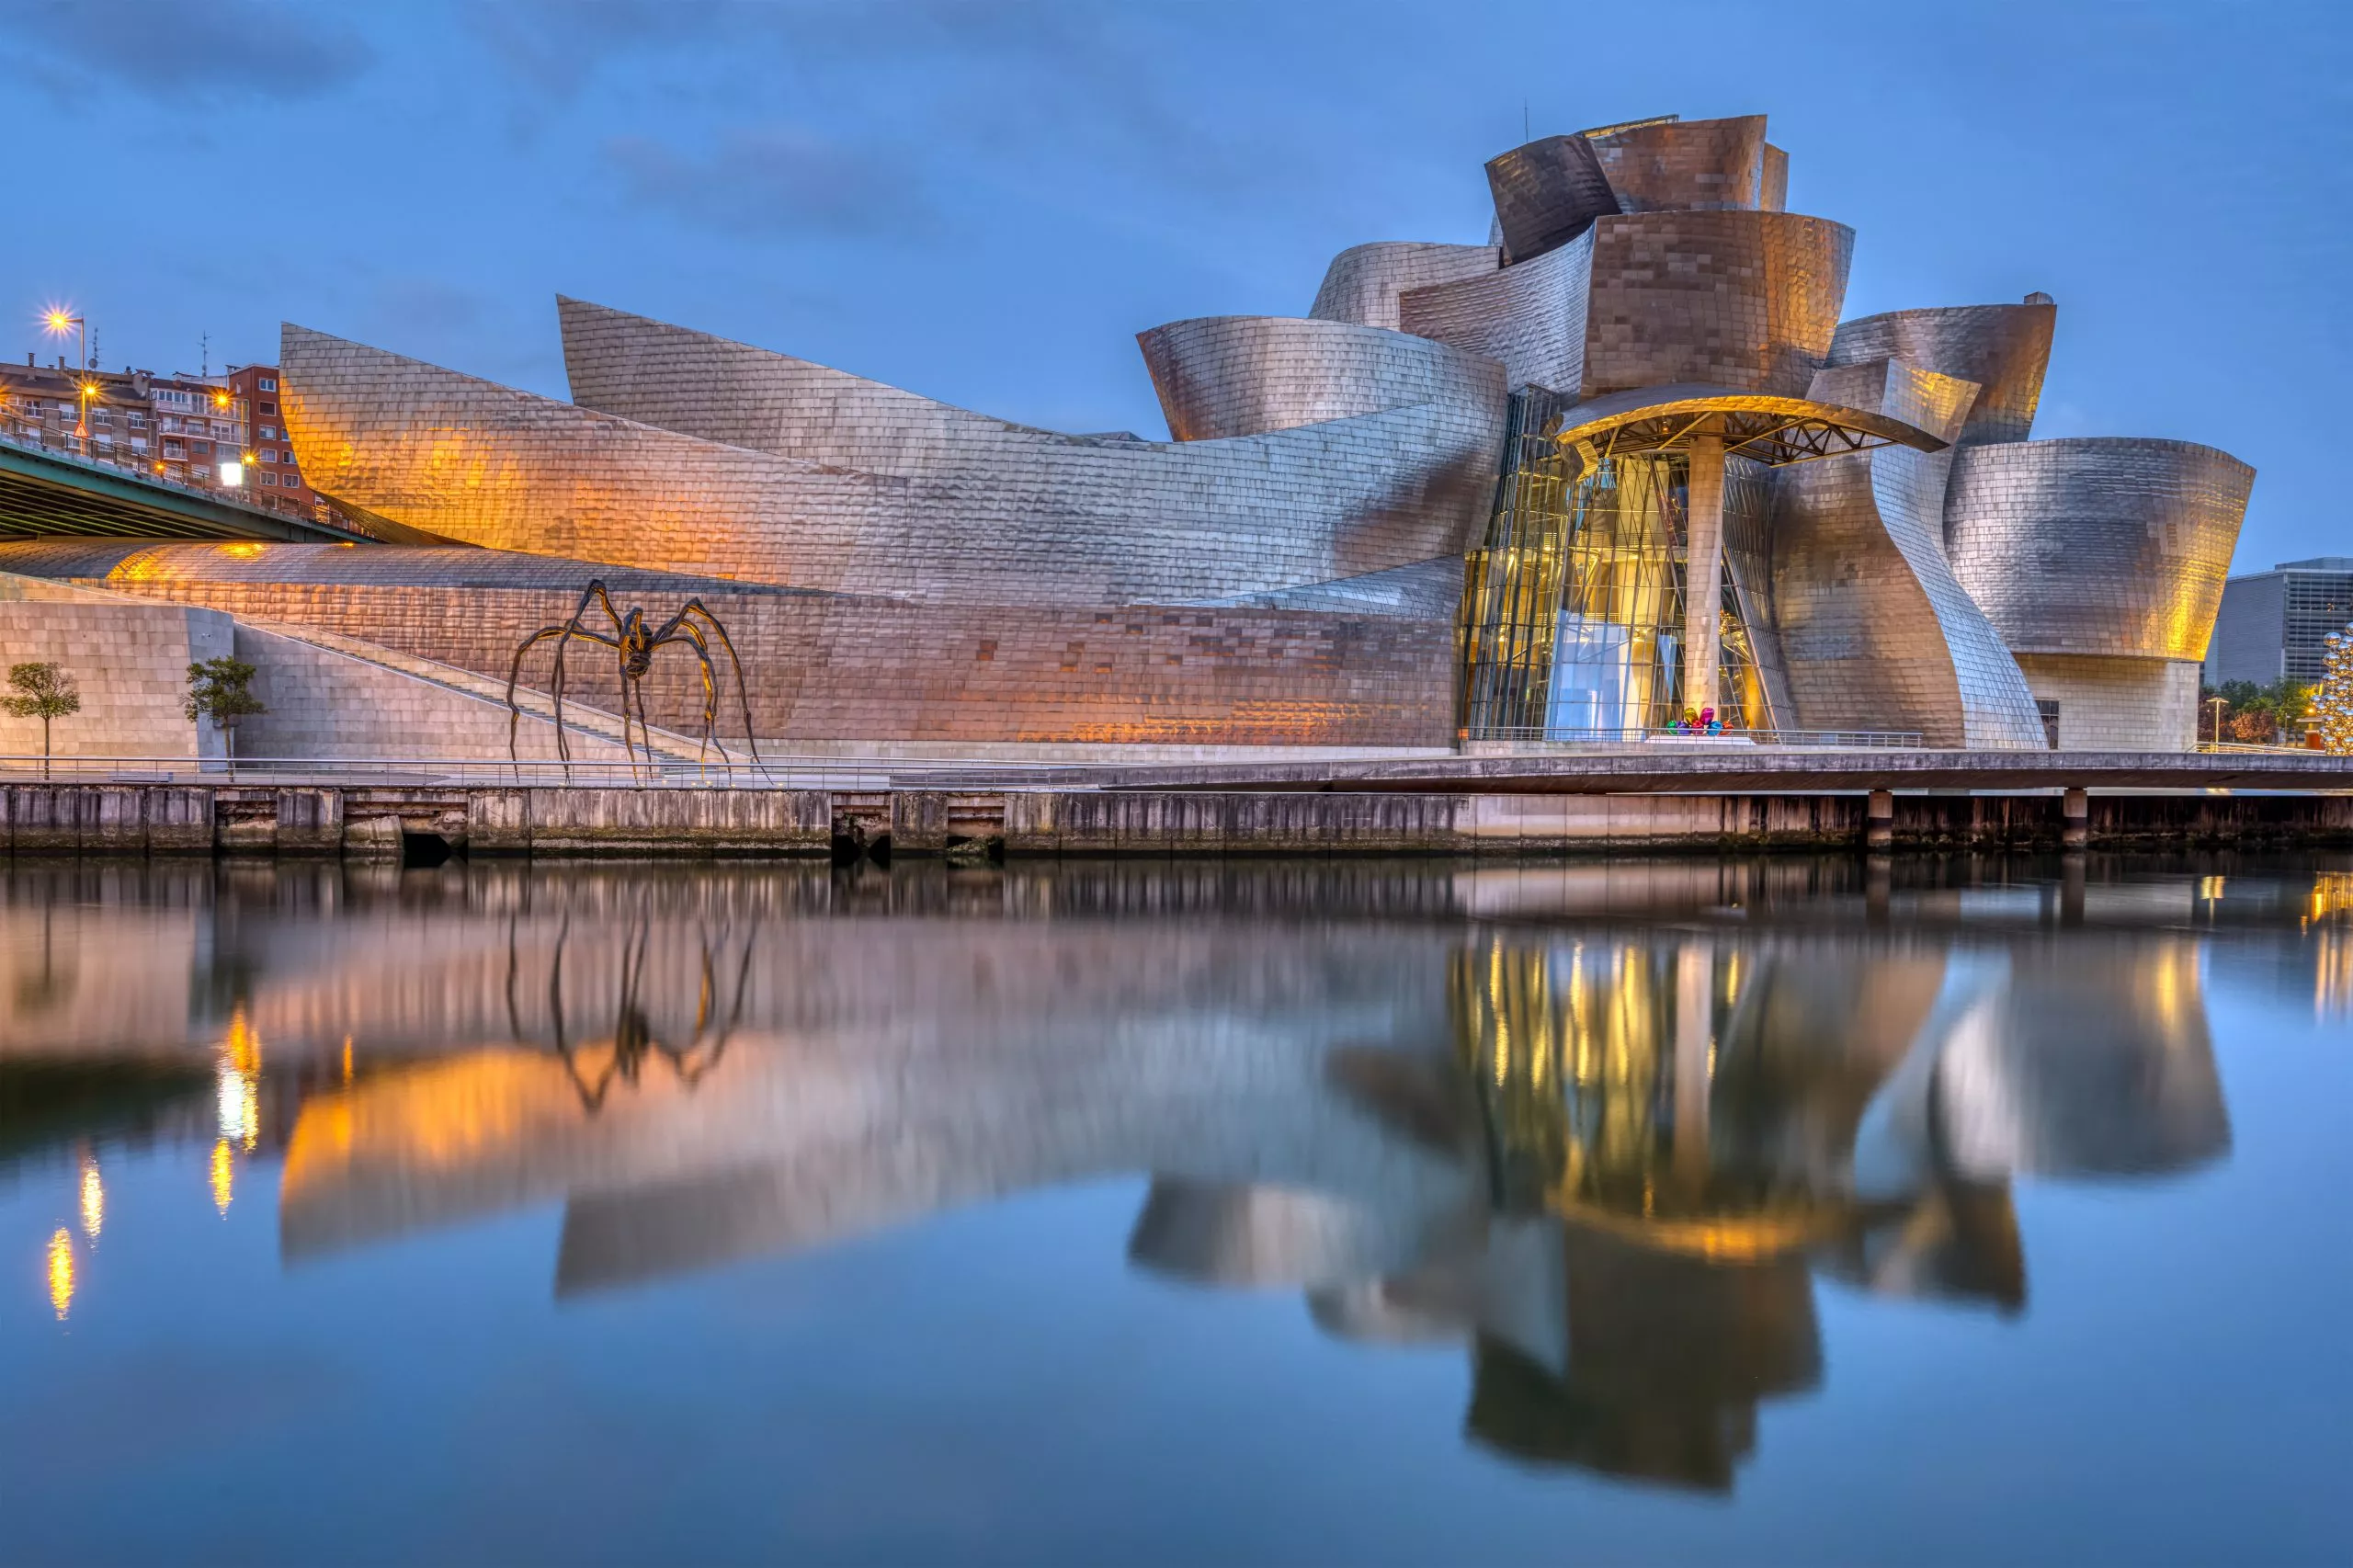 Bilbao, Spain - July 10, 2021: The famous Guggenheim Museum reflected in the River Nervion at dawn